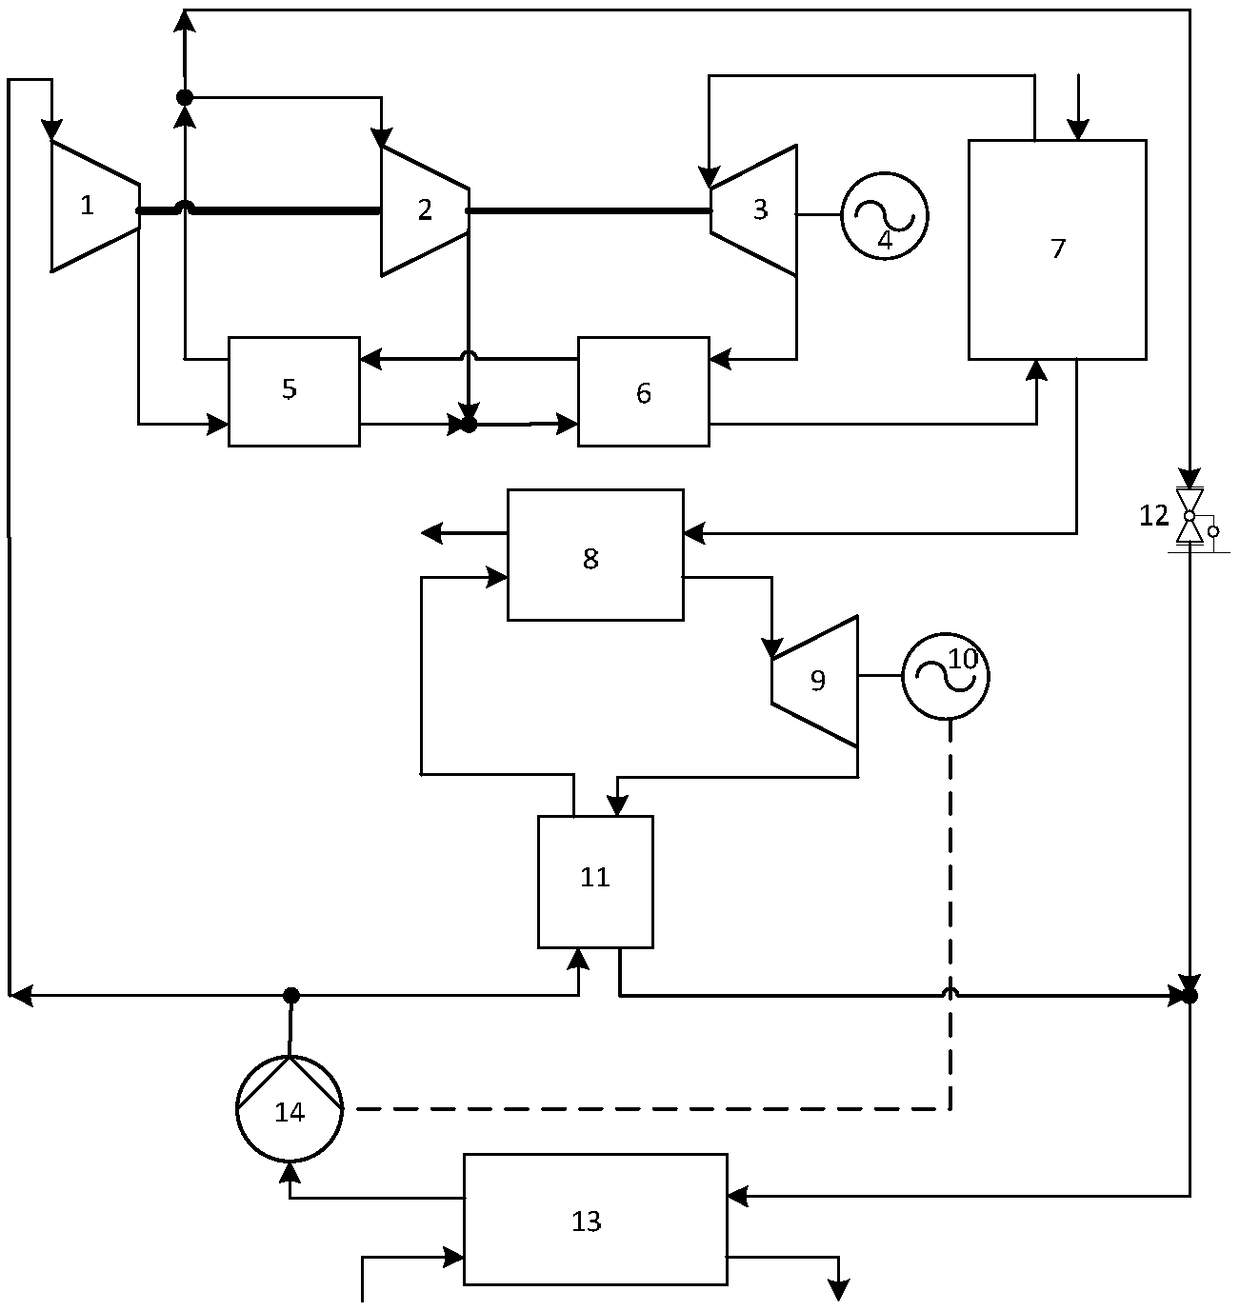 Supercritical/trans-critical carbon dioxide combined cycle power generation system for internal combustion engine waste-heat utilization